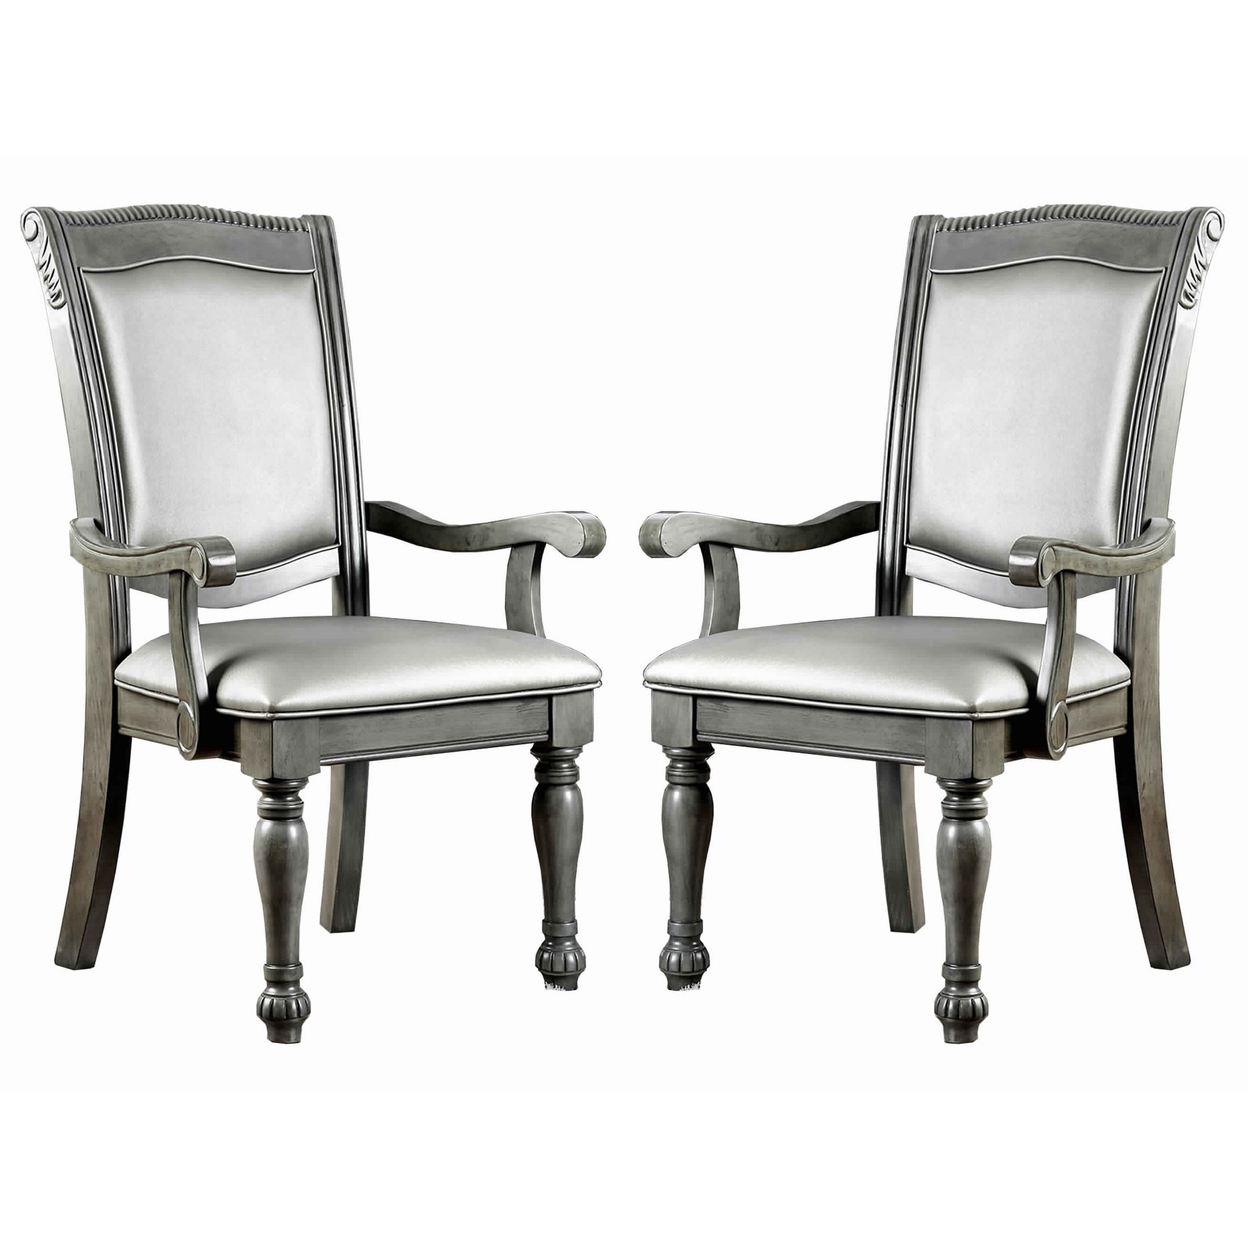 Traditional Style Wooden Arm Chair With Leatherette Cushions In Gray, Set Of 2- Saltoro Sherpi